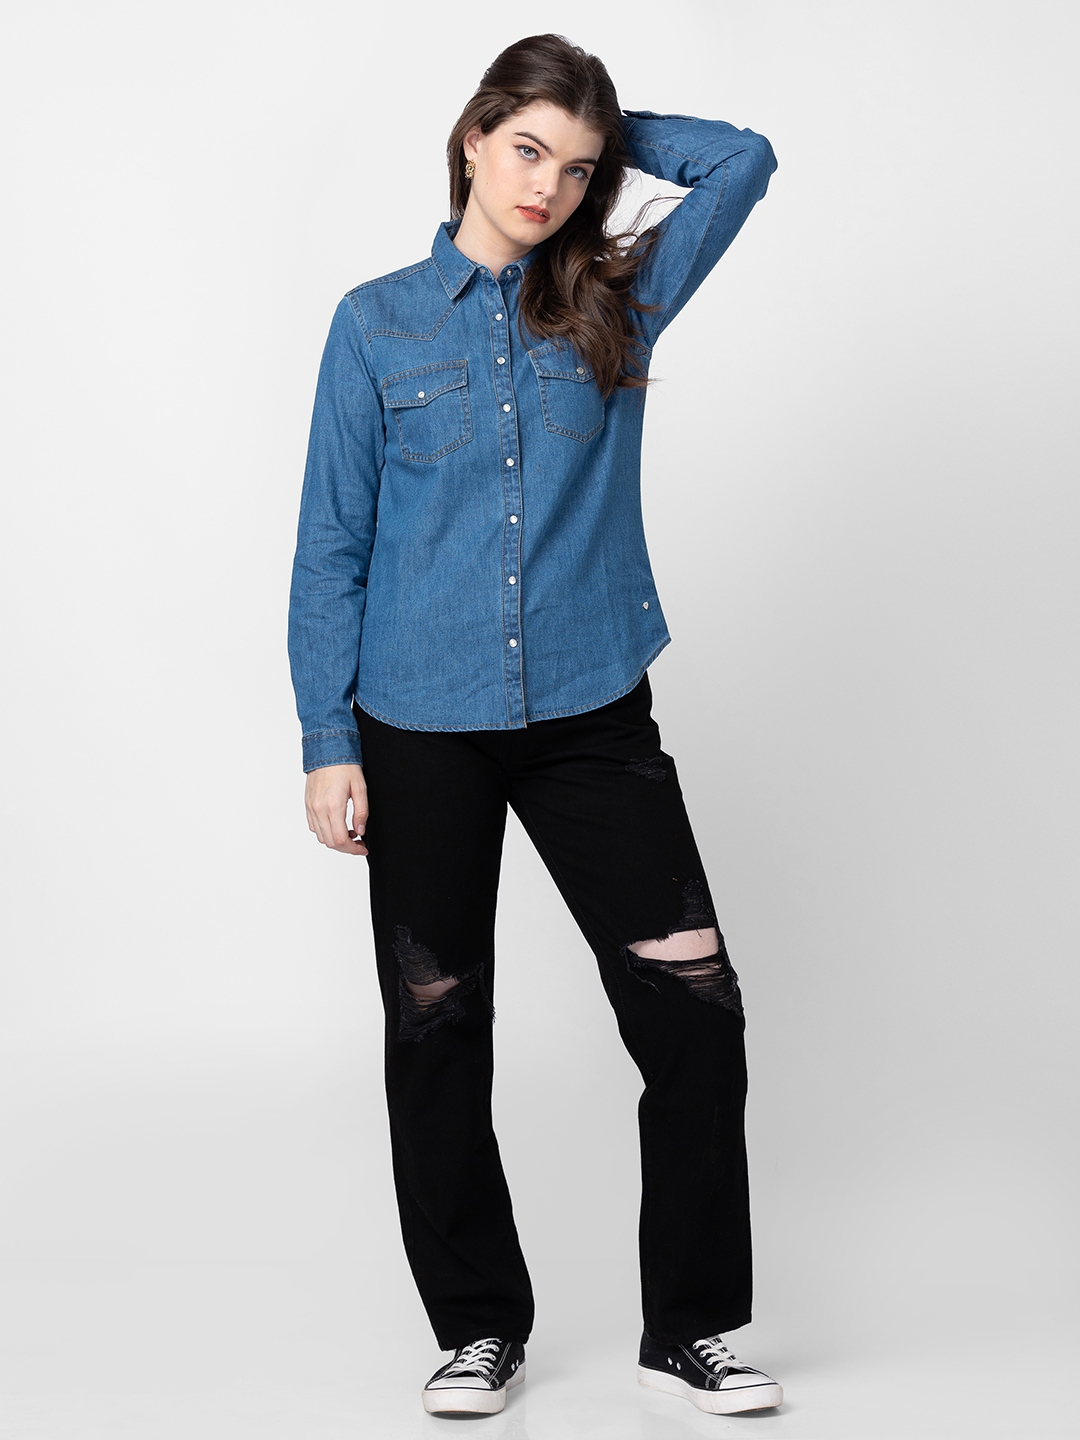 Pepe Jeans Women Solid Casual Light Blue Shirt - Buy Pepe Jeans Women Solid  Casual Light Blue Shirt Online at Best Prices in India | Flipkart.com